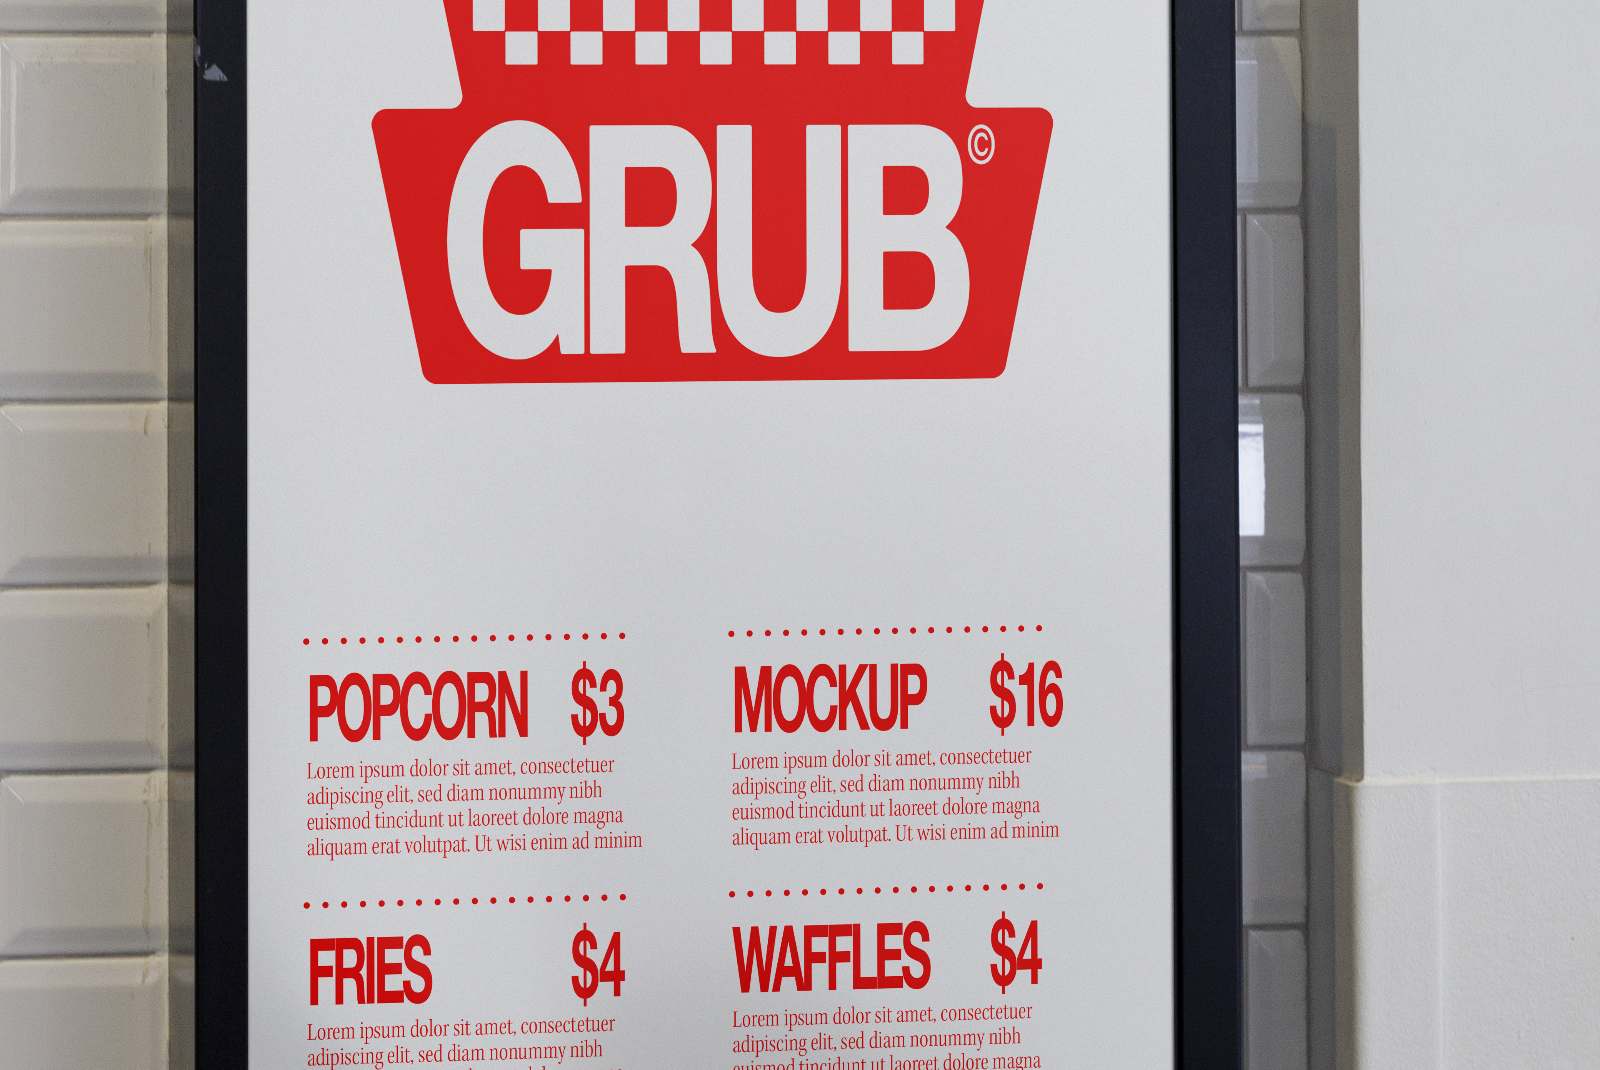 Menu board mockup in a frame featuring snack prices, ideal for designers working on restaurant displays or food-related advertising.